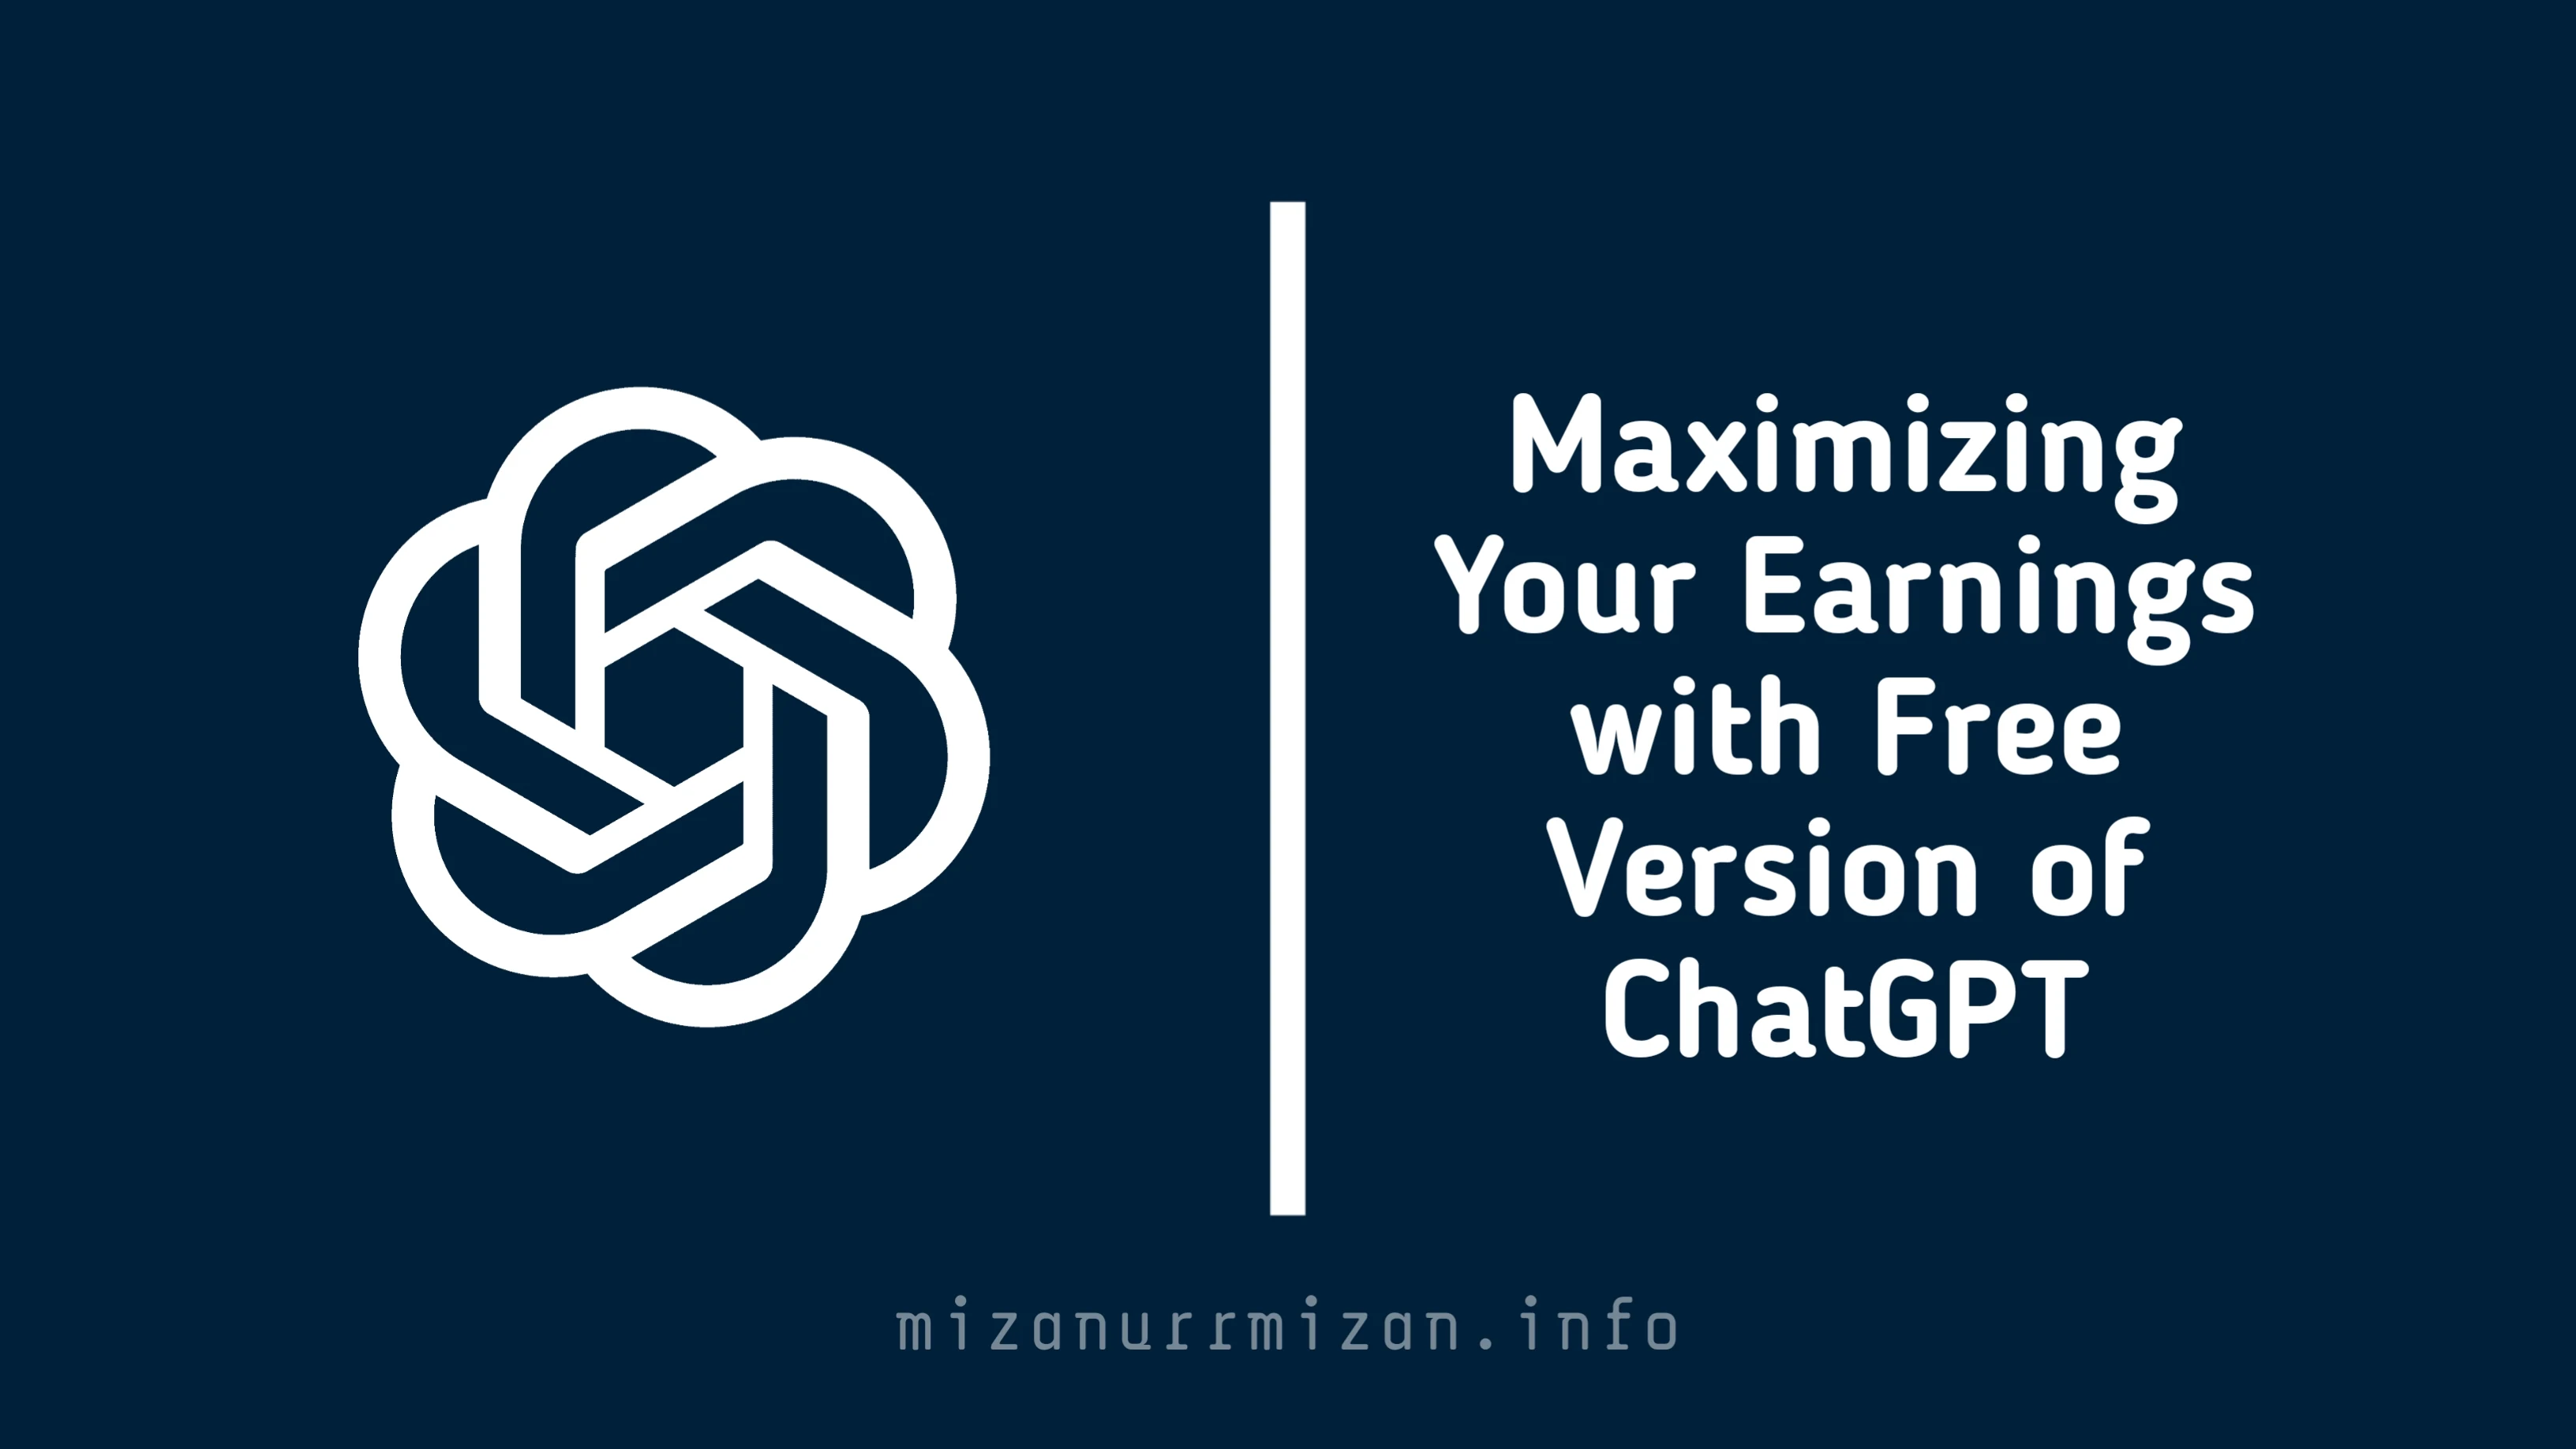 Maximizing Your Earnings with Free Version of ChatGPT | Maximize earnings with ChatGPT free version: Create content, boost marketing, enhance e-commerce. Leverage AI wisely for sustainable success.